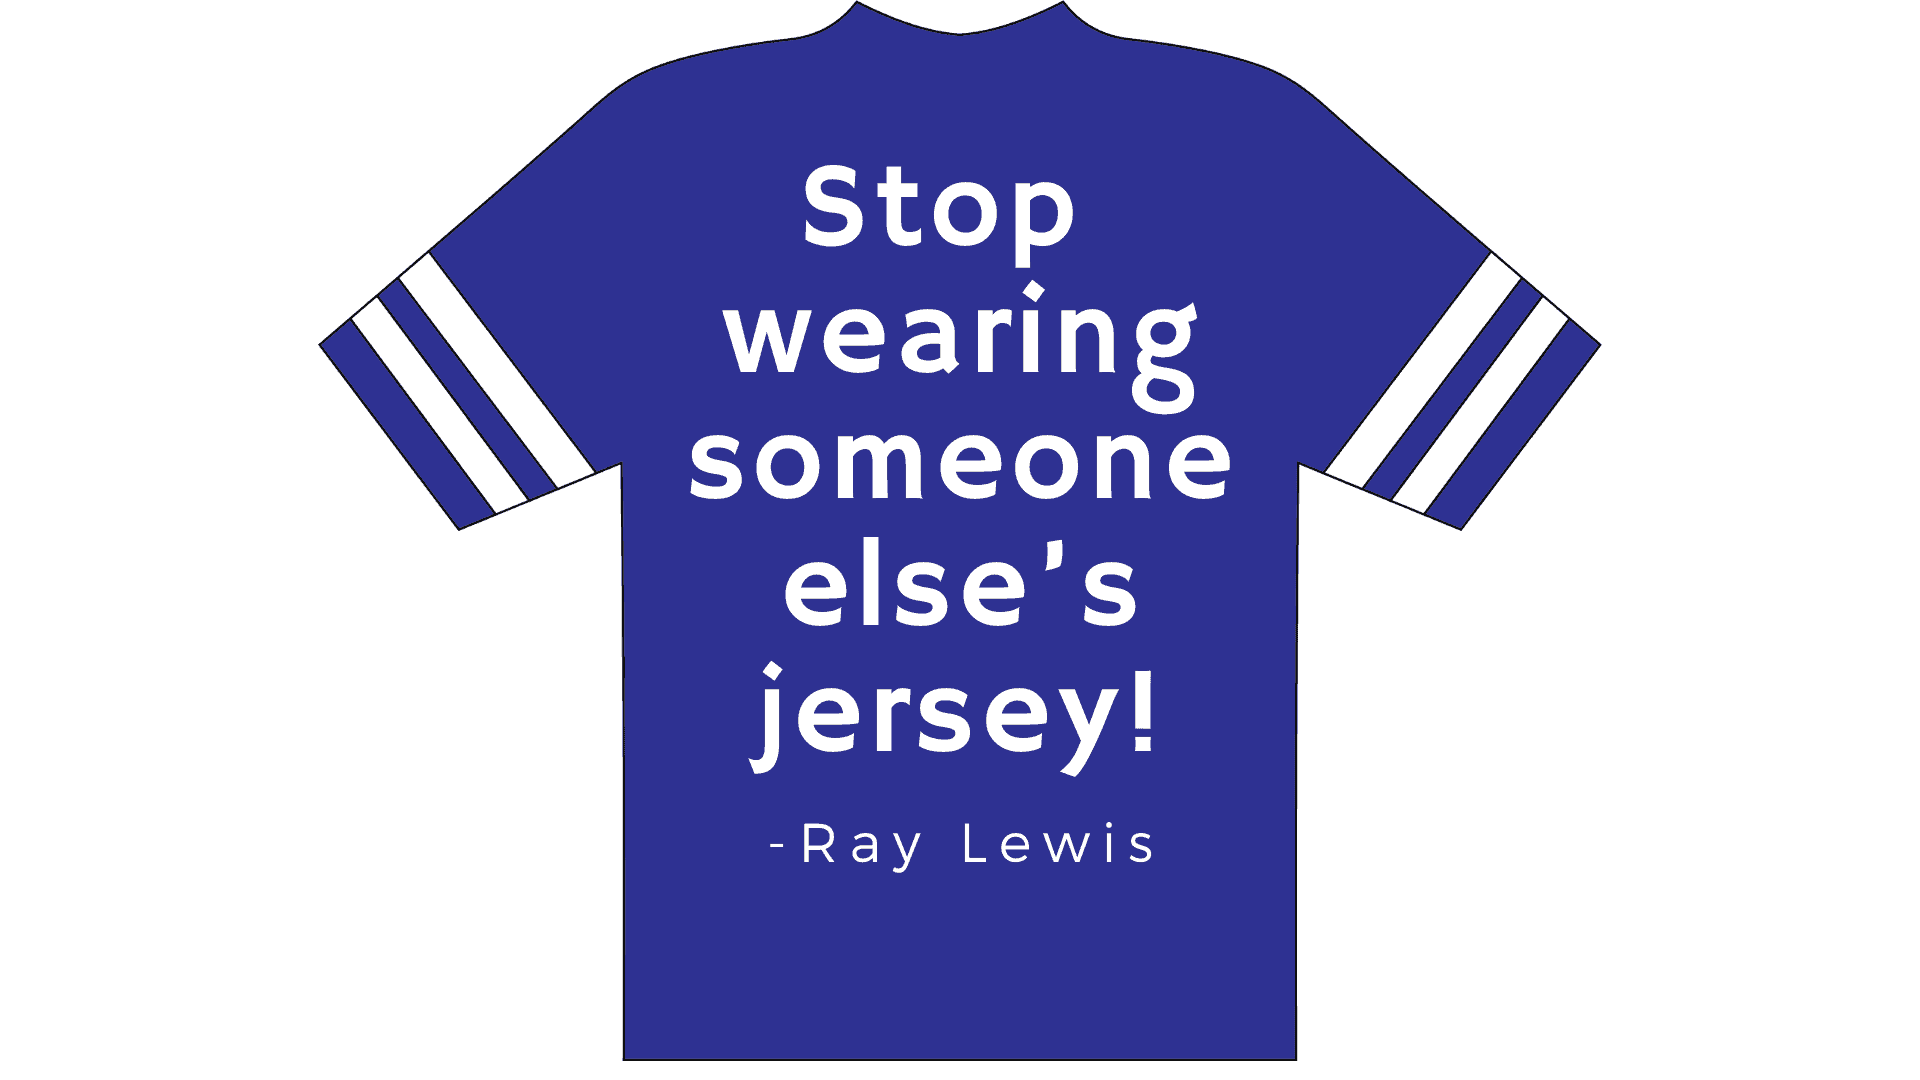 Blue football jersey with this quote "Stop wearing someone else's jersey!" by Ray Lewis